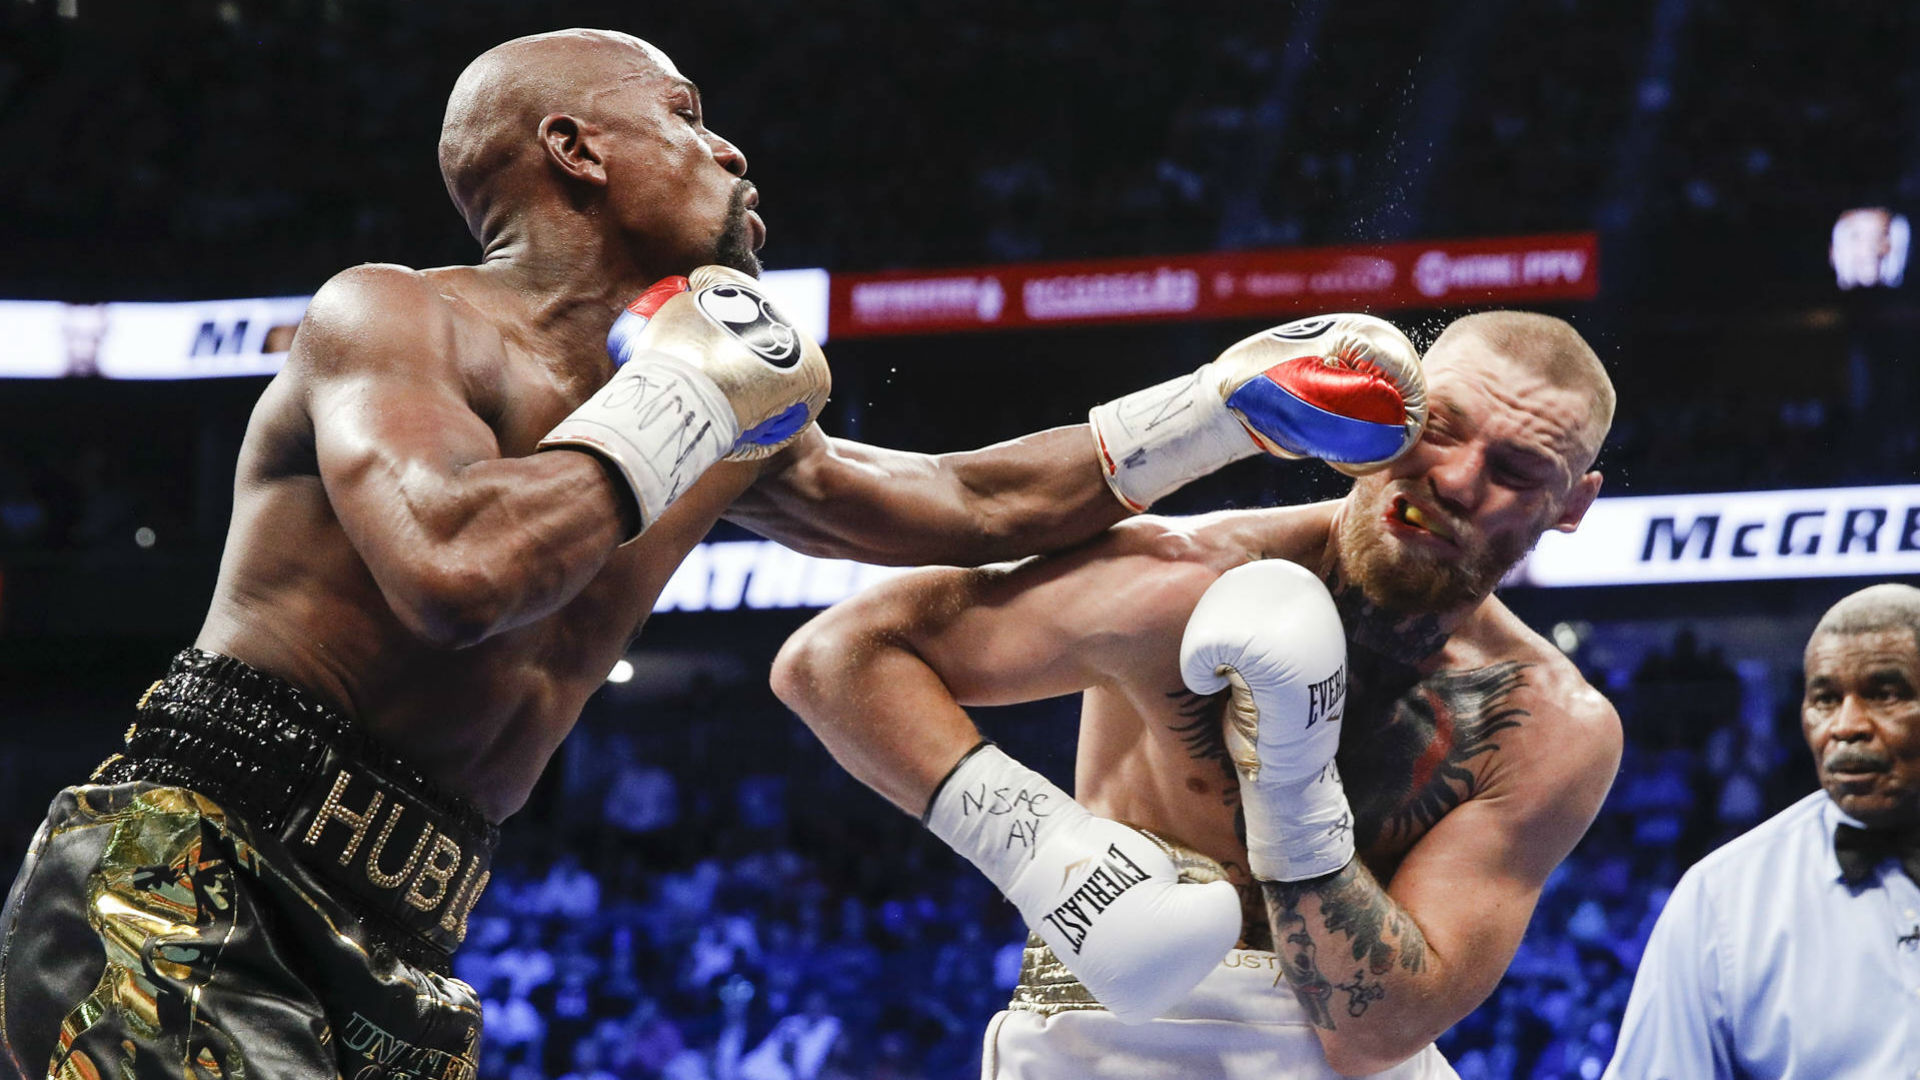 Mayweather vs. McGregor: Floyd Mayweather's 50-0 record comes with an asterisk | Sporting News